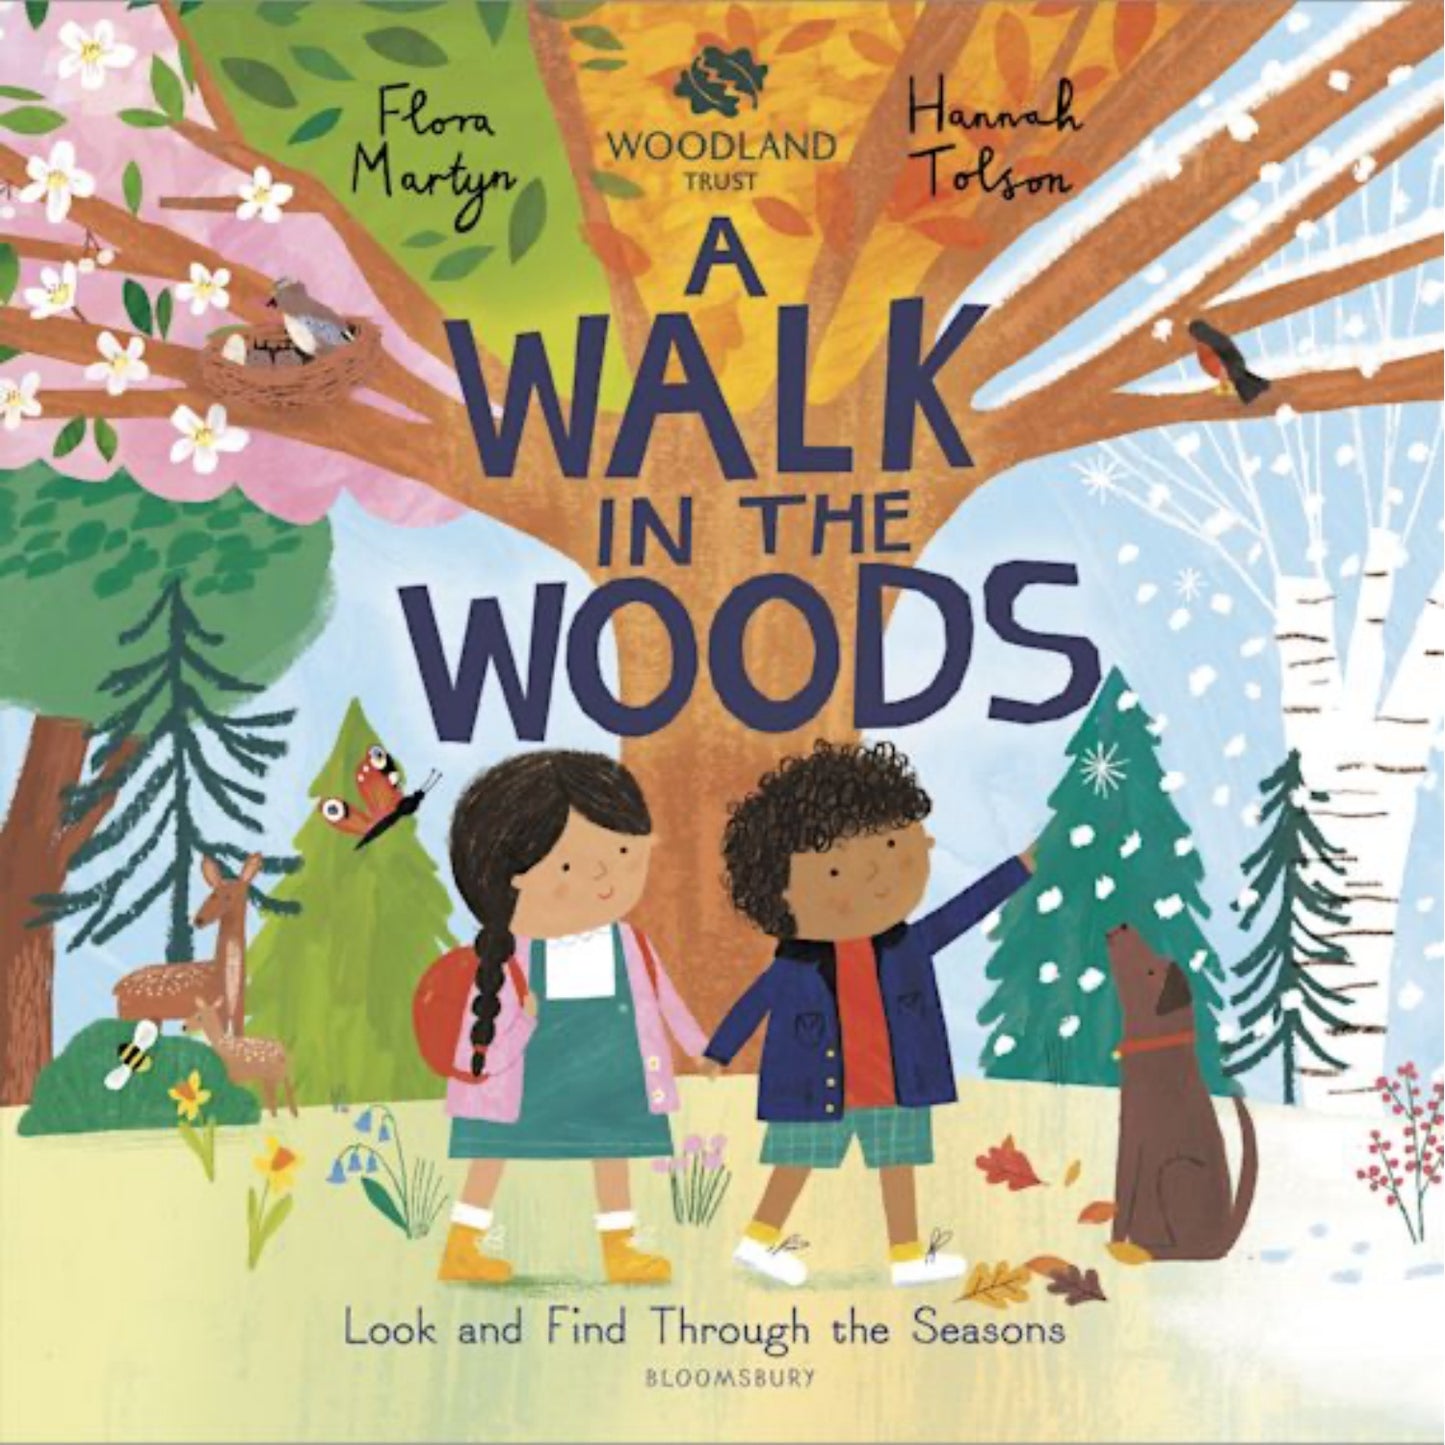 A Walk in the Woods - The Woodland Trust | Hardcover | Children's Book on Nature